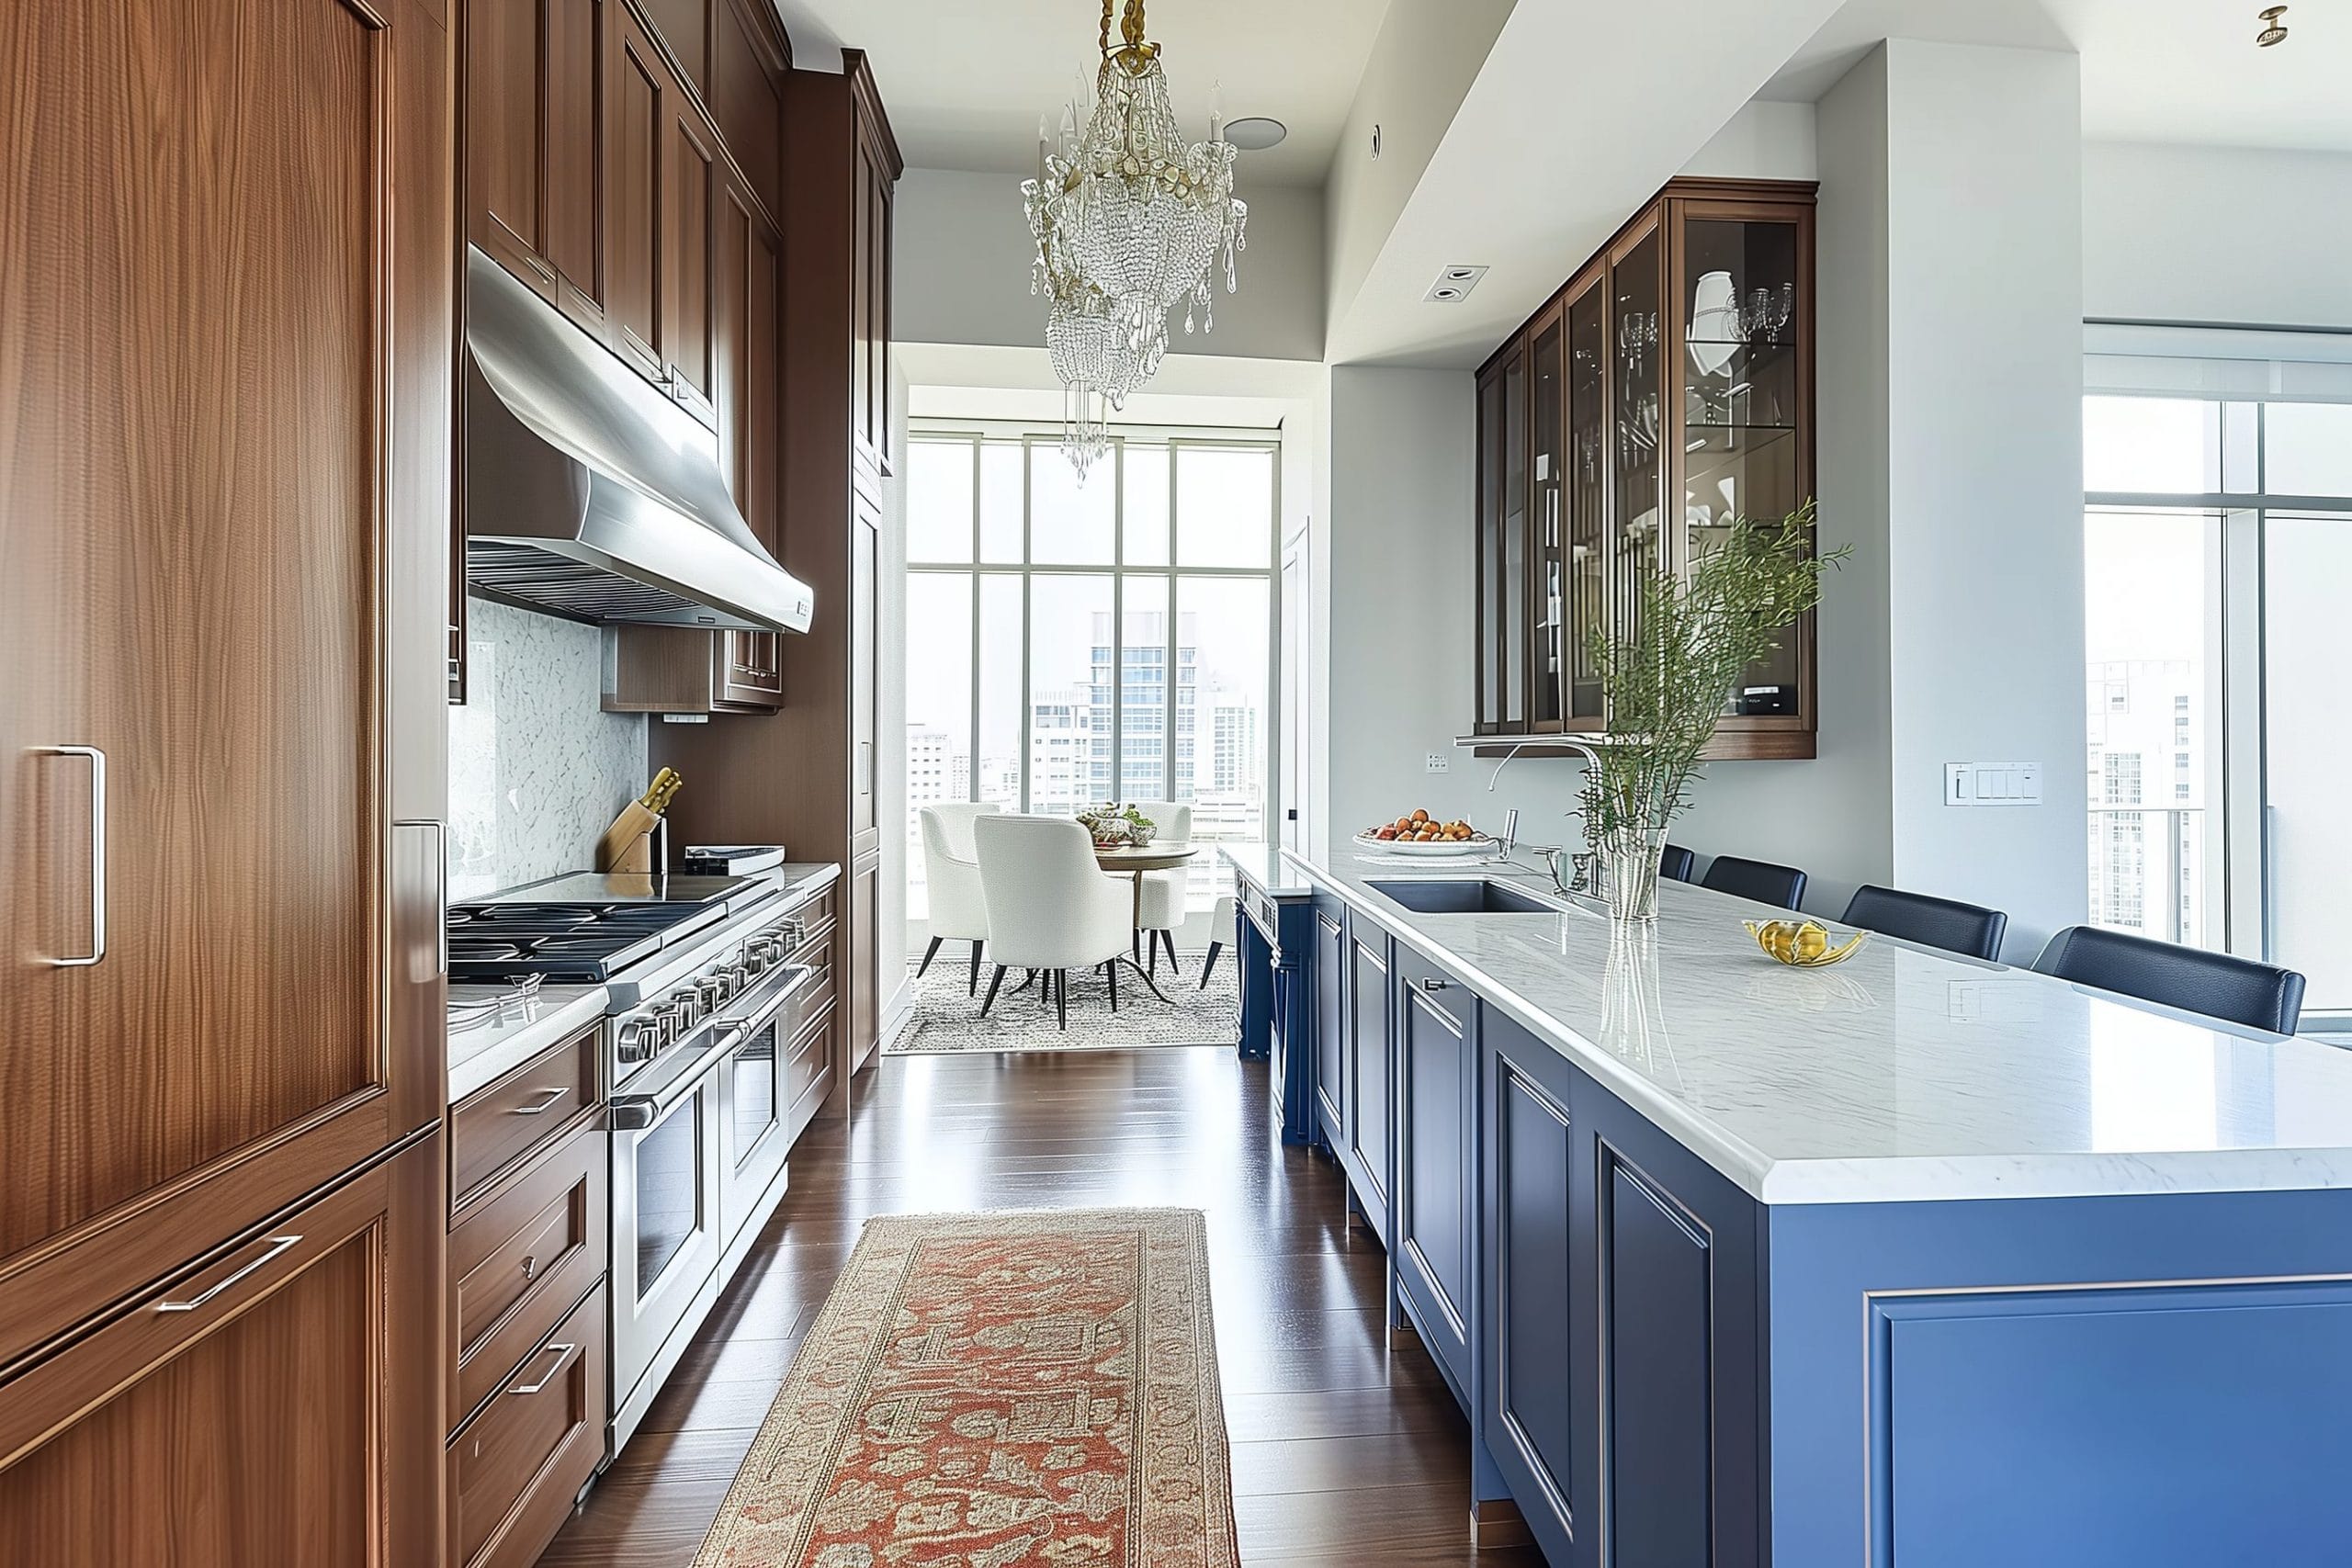 Galley Kitchen Ideas and Design: Navigating Narrow Spaces with Style